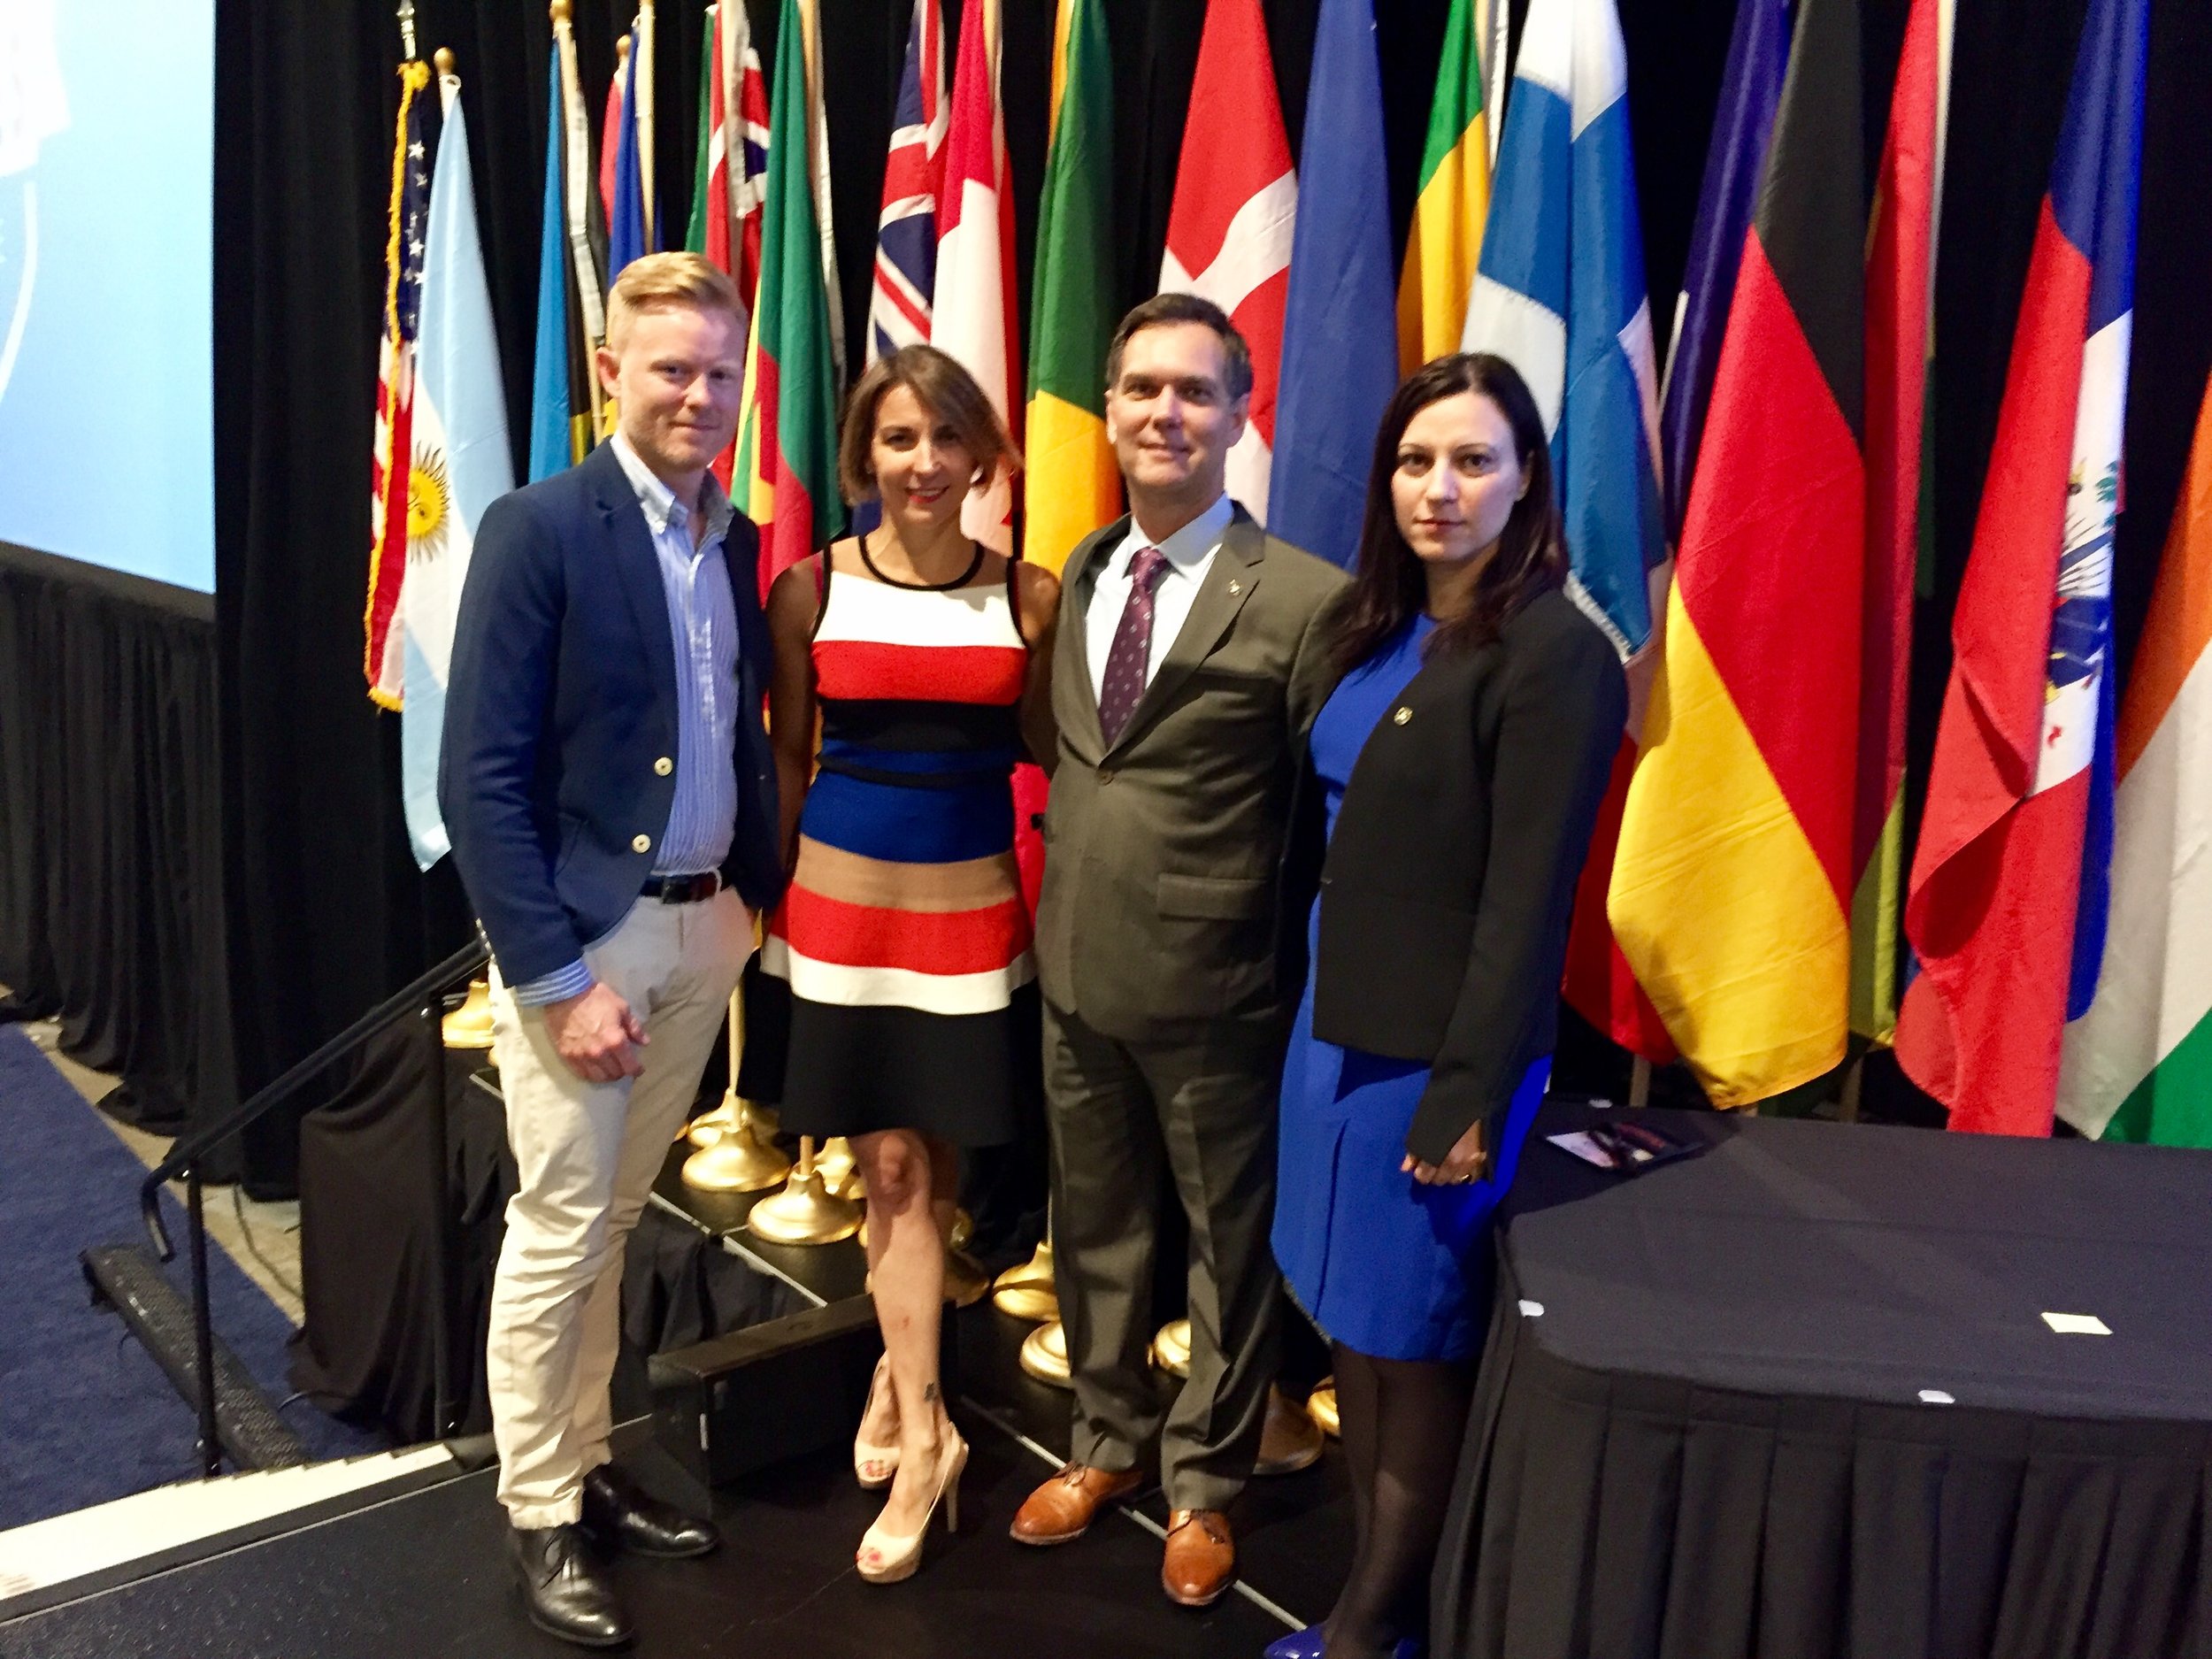  Danish Chapter Leaders. From left to right, Thomas Boegballe, CFE, Dr. Nadia Dosio, CFE, Nicoleta Mehlsen, CFE, with ACFE Vice President and Program Director Bruce Dorris, CFE 